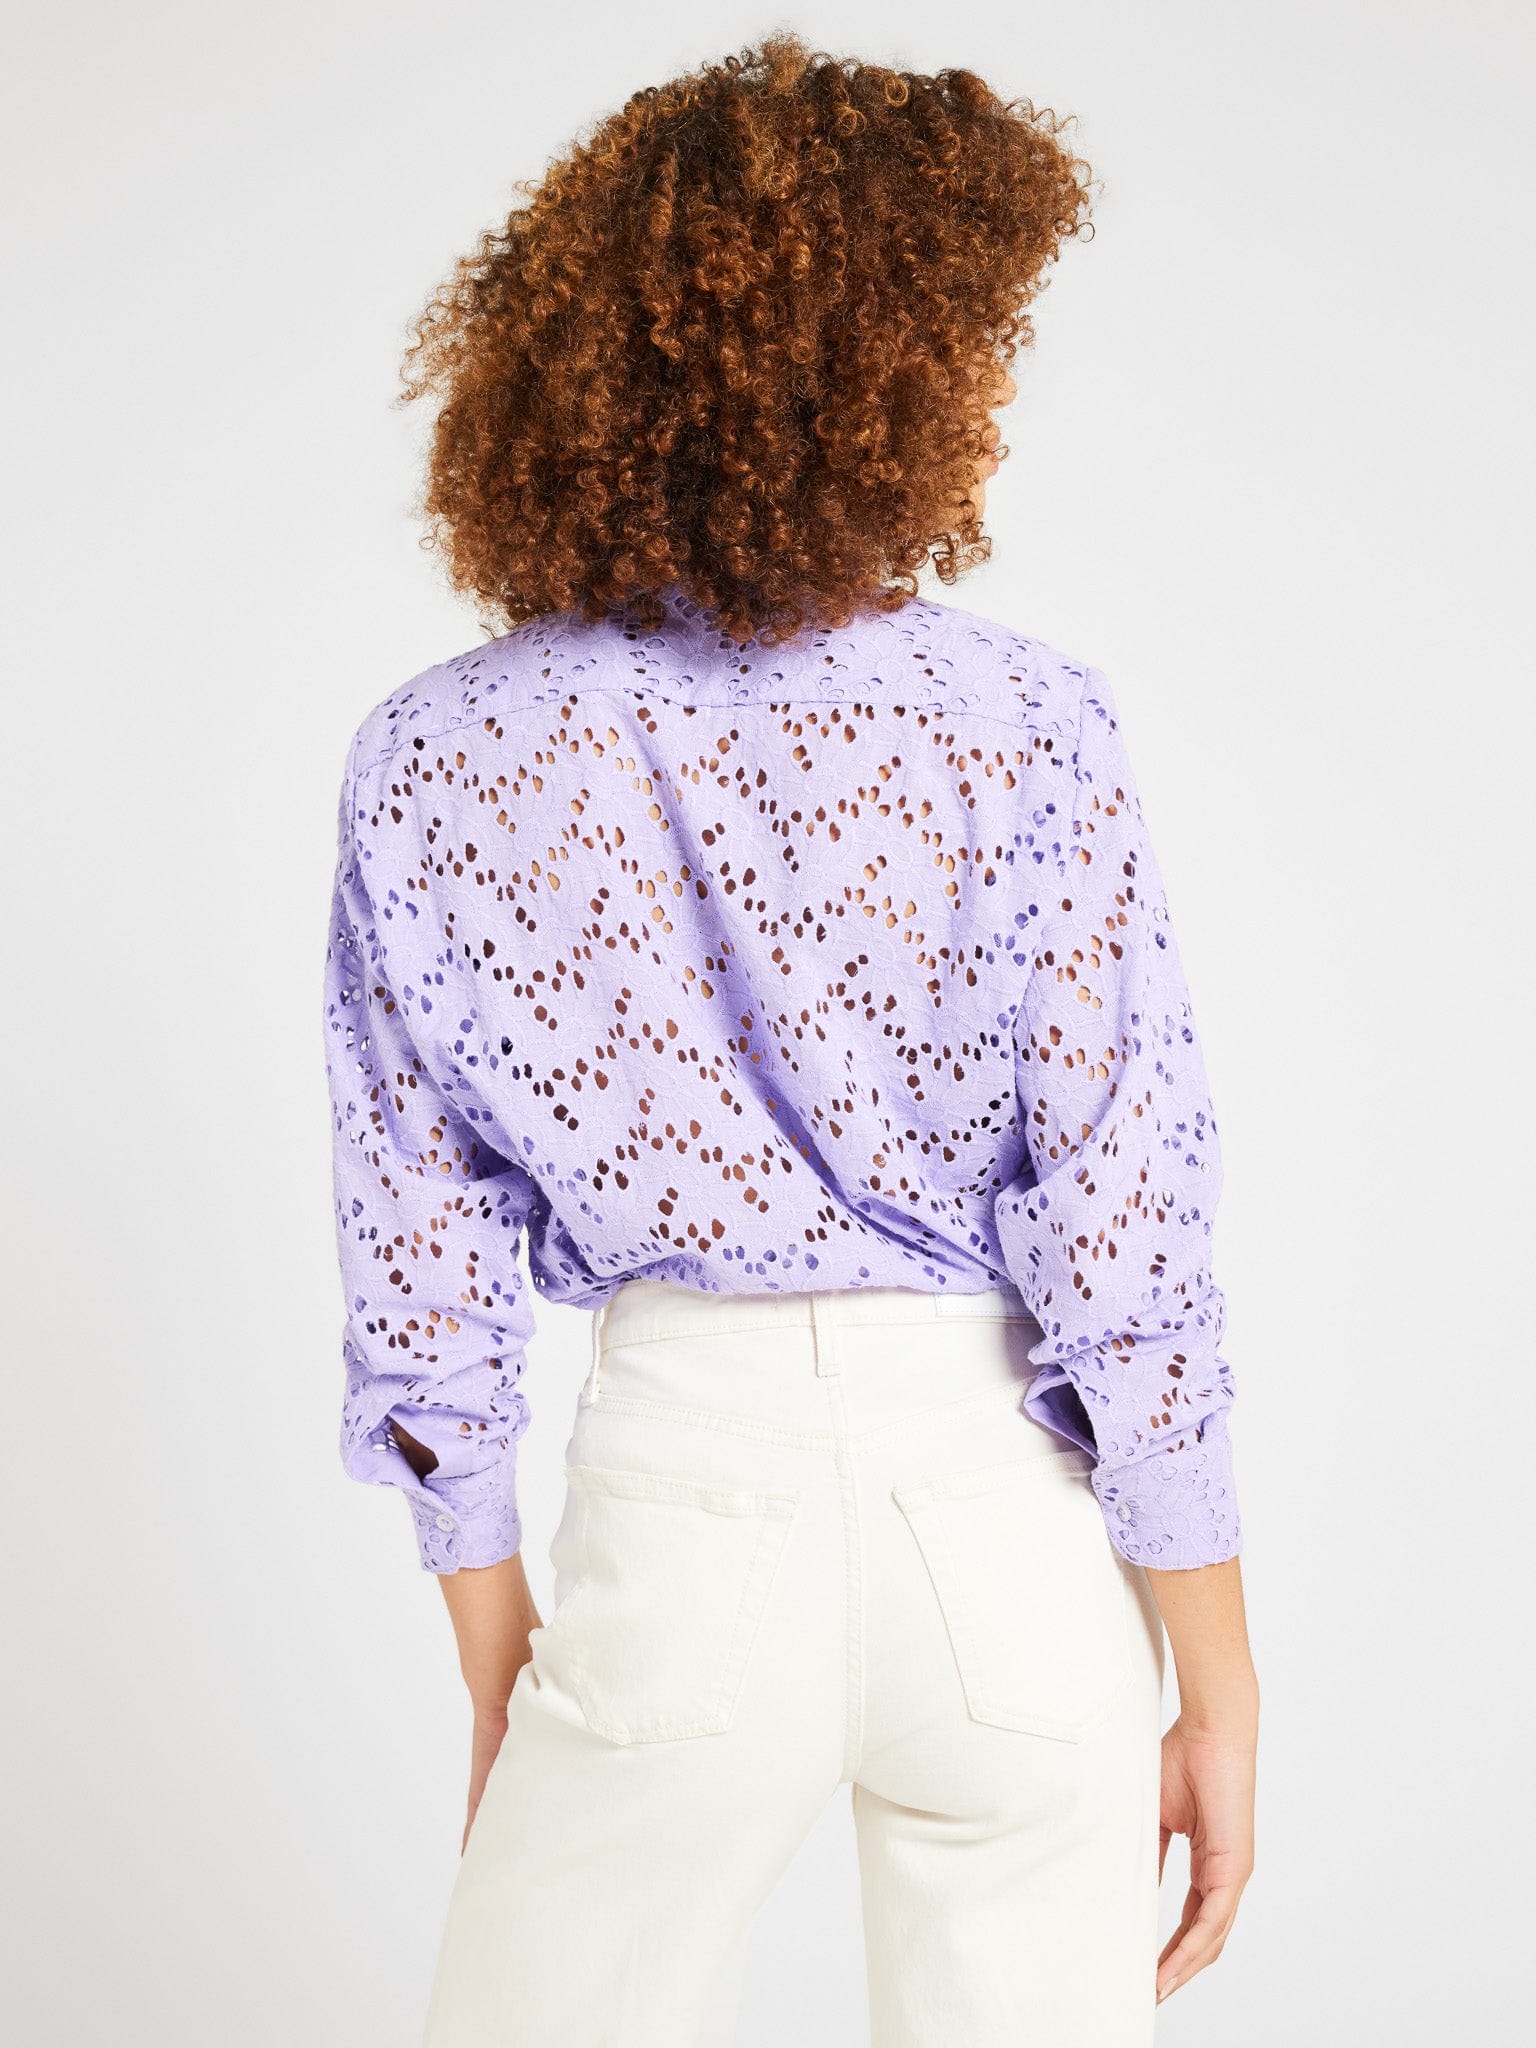 MILLE Clothing Sofia Top in Taffy Eyelet